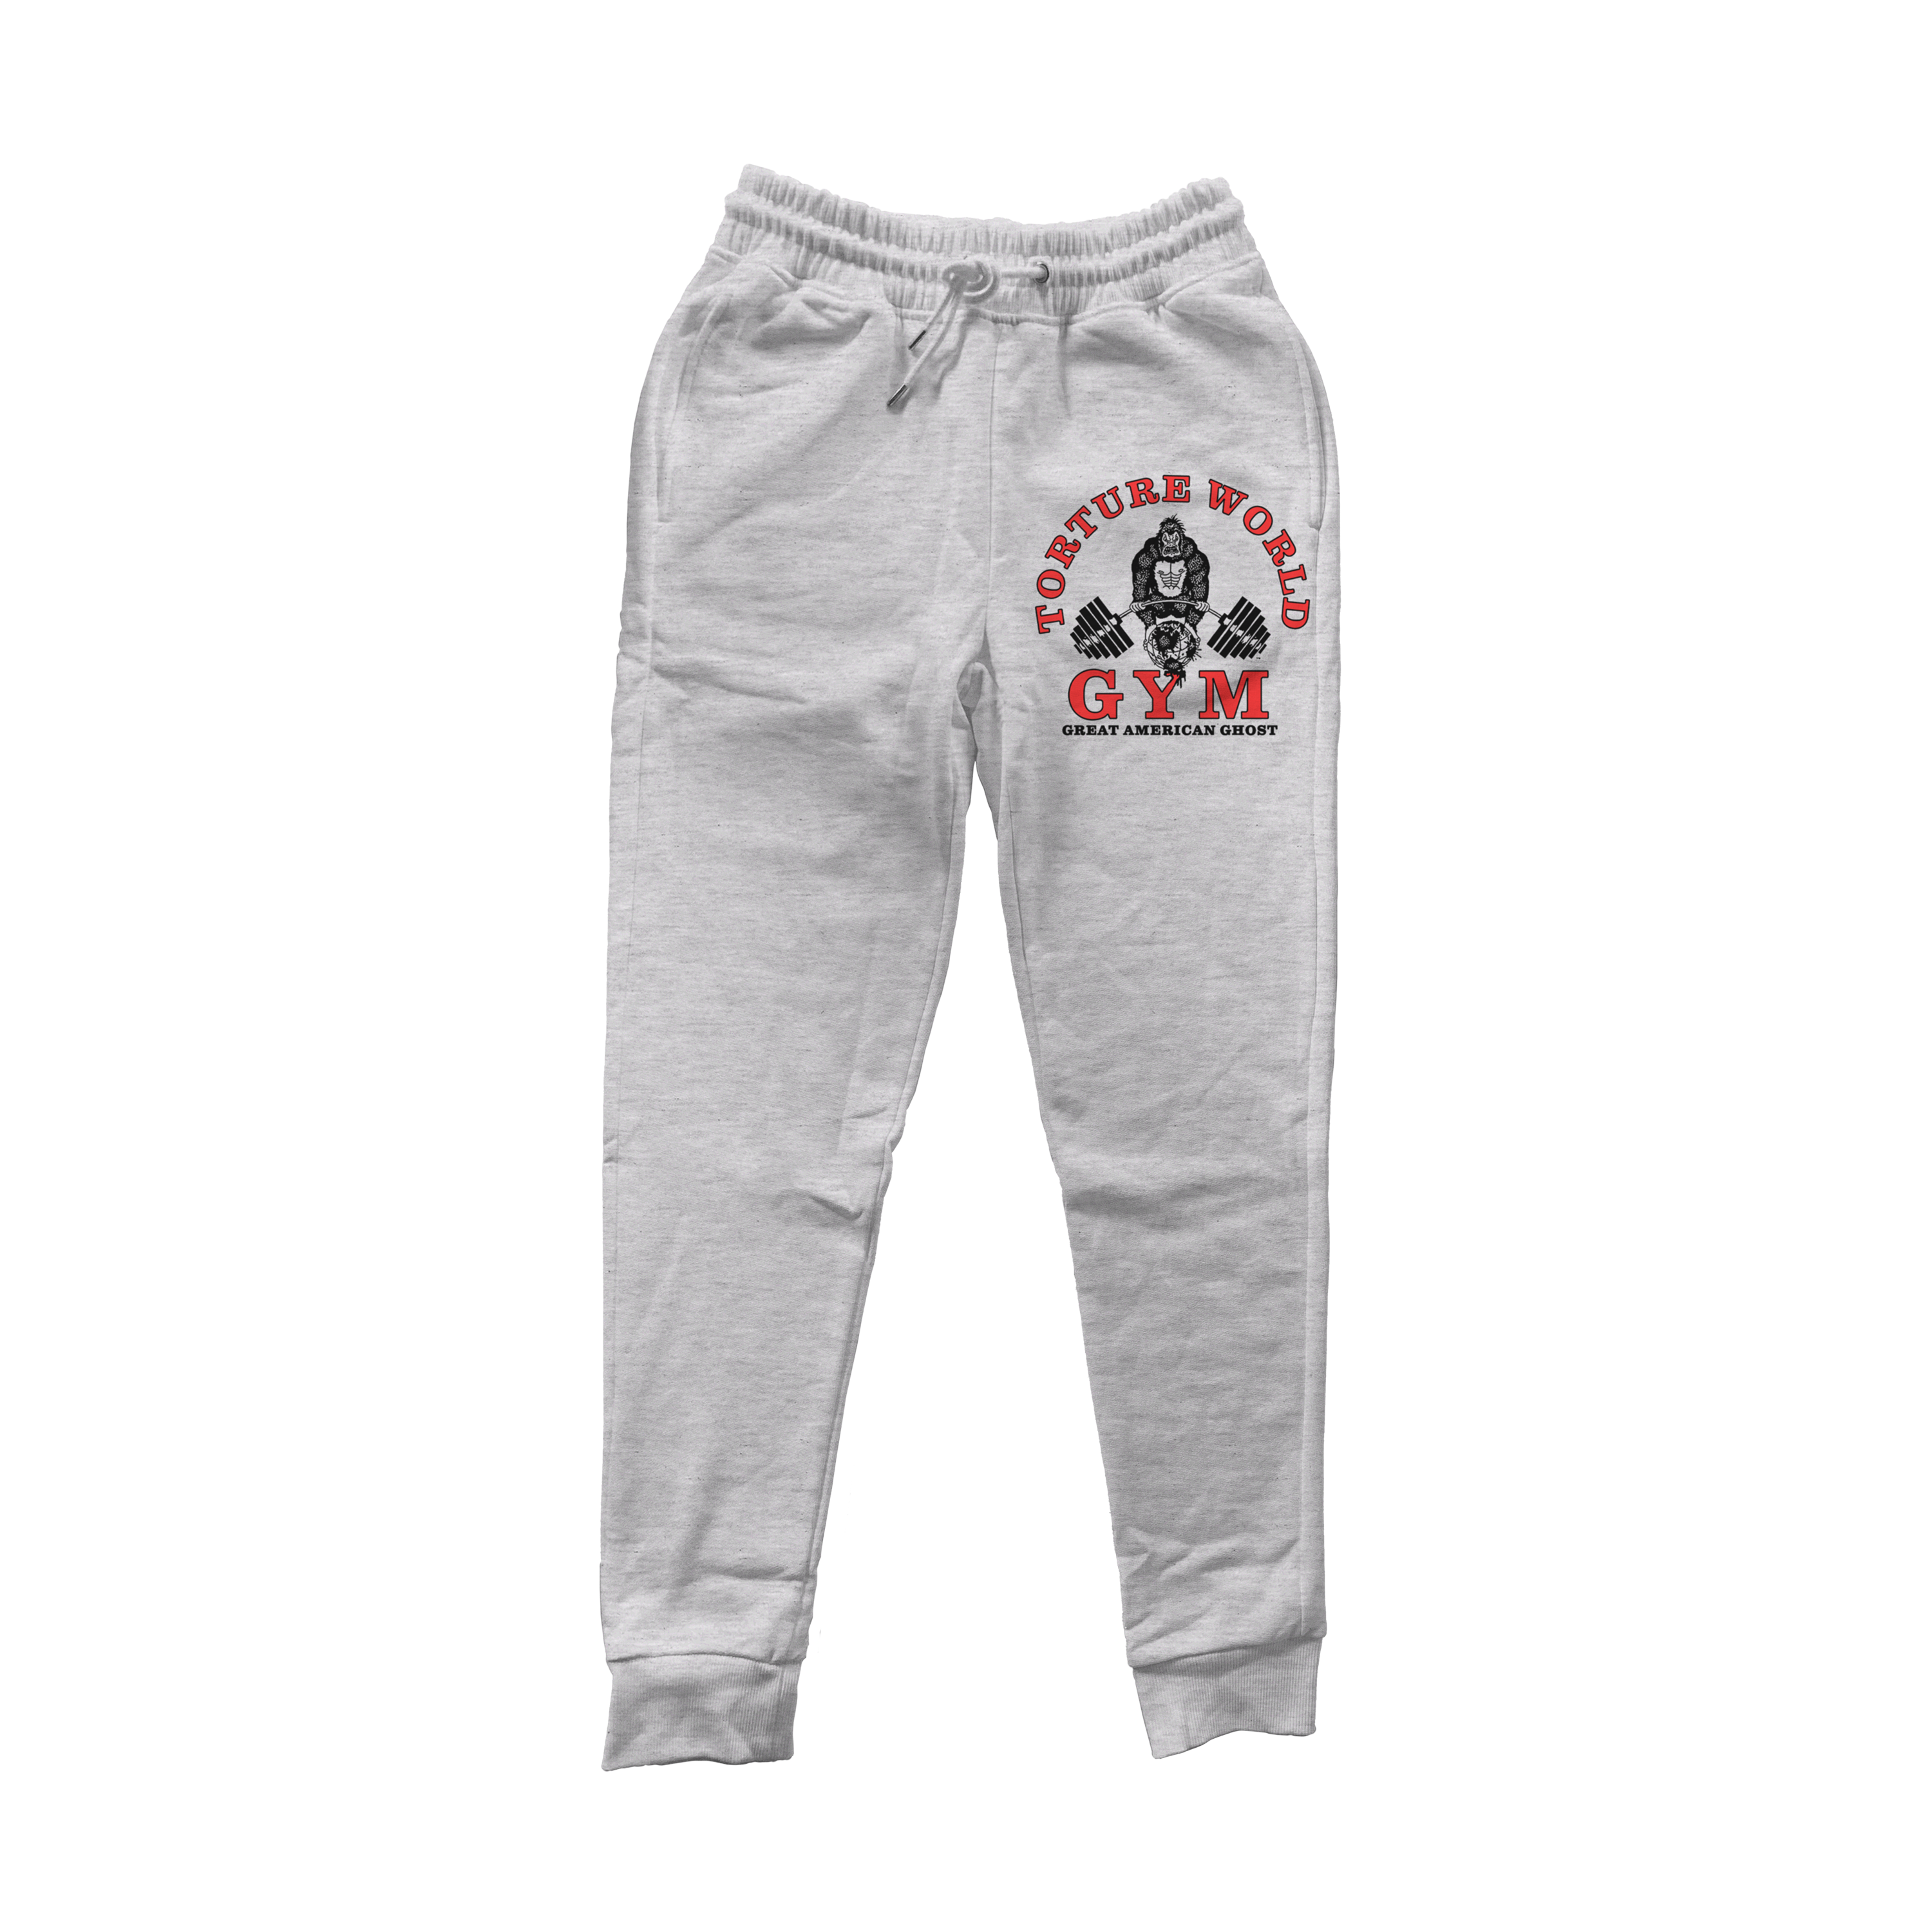 Great American Ghost - Torture World Gym Joggers